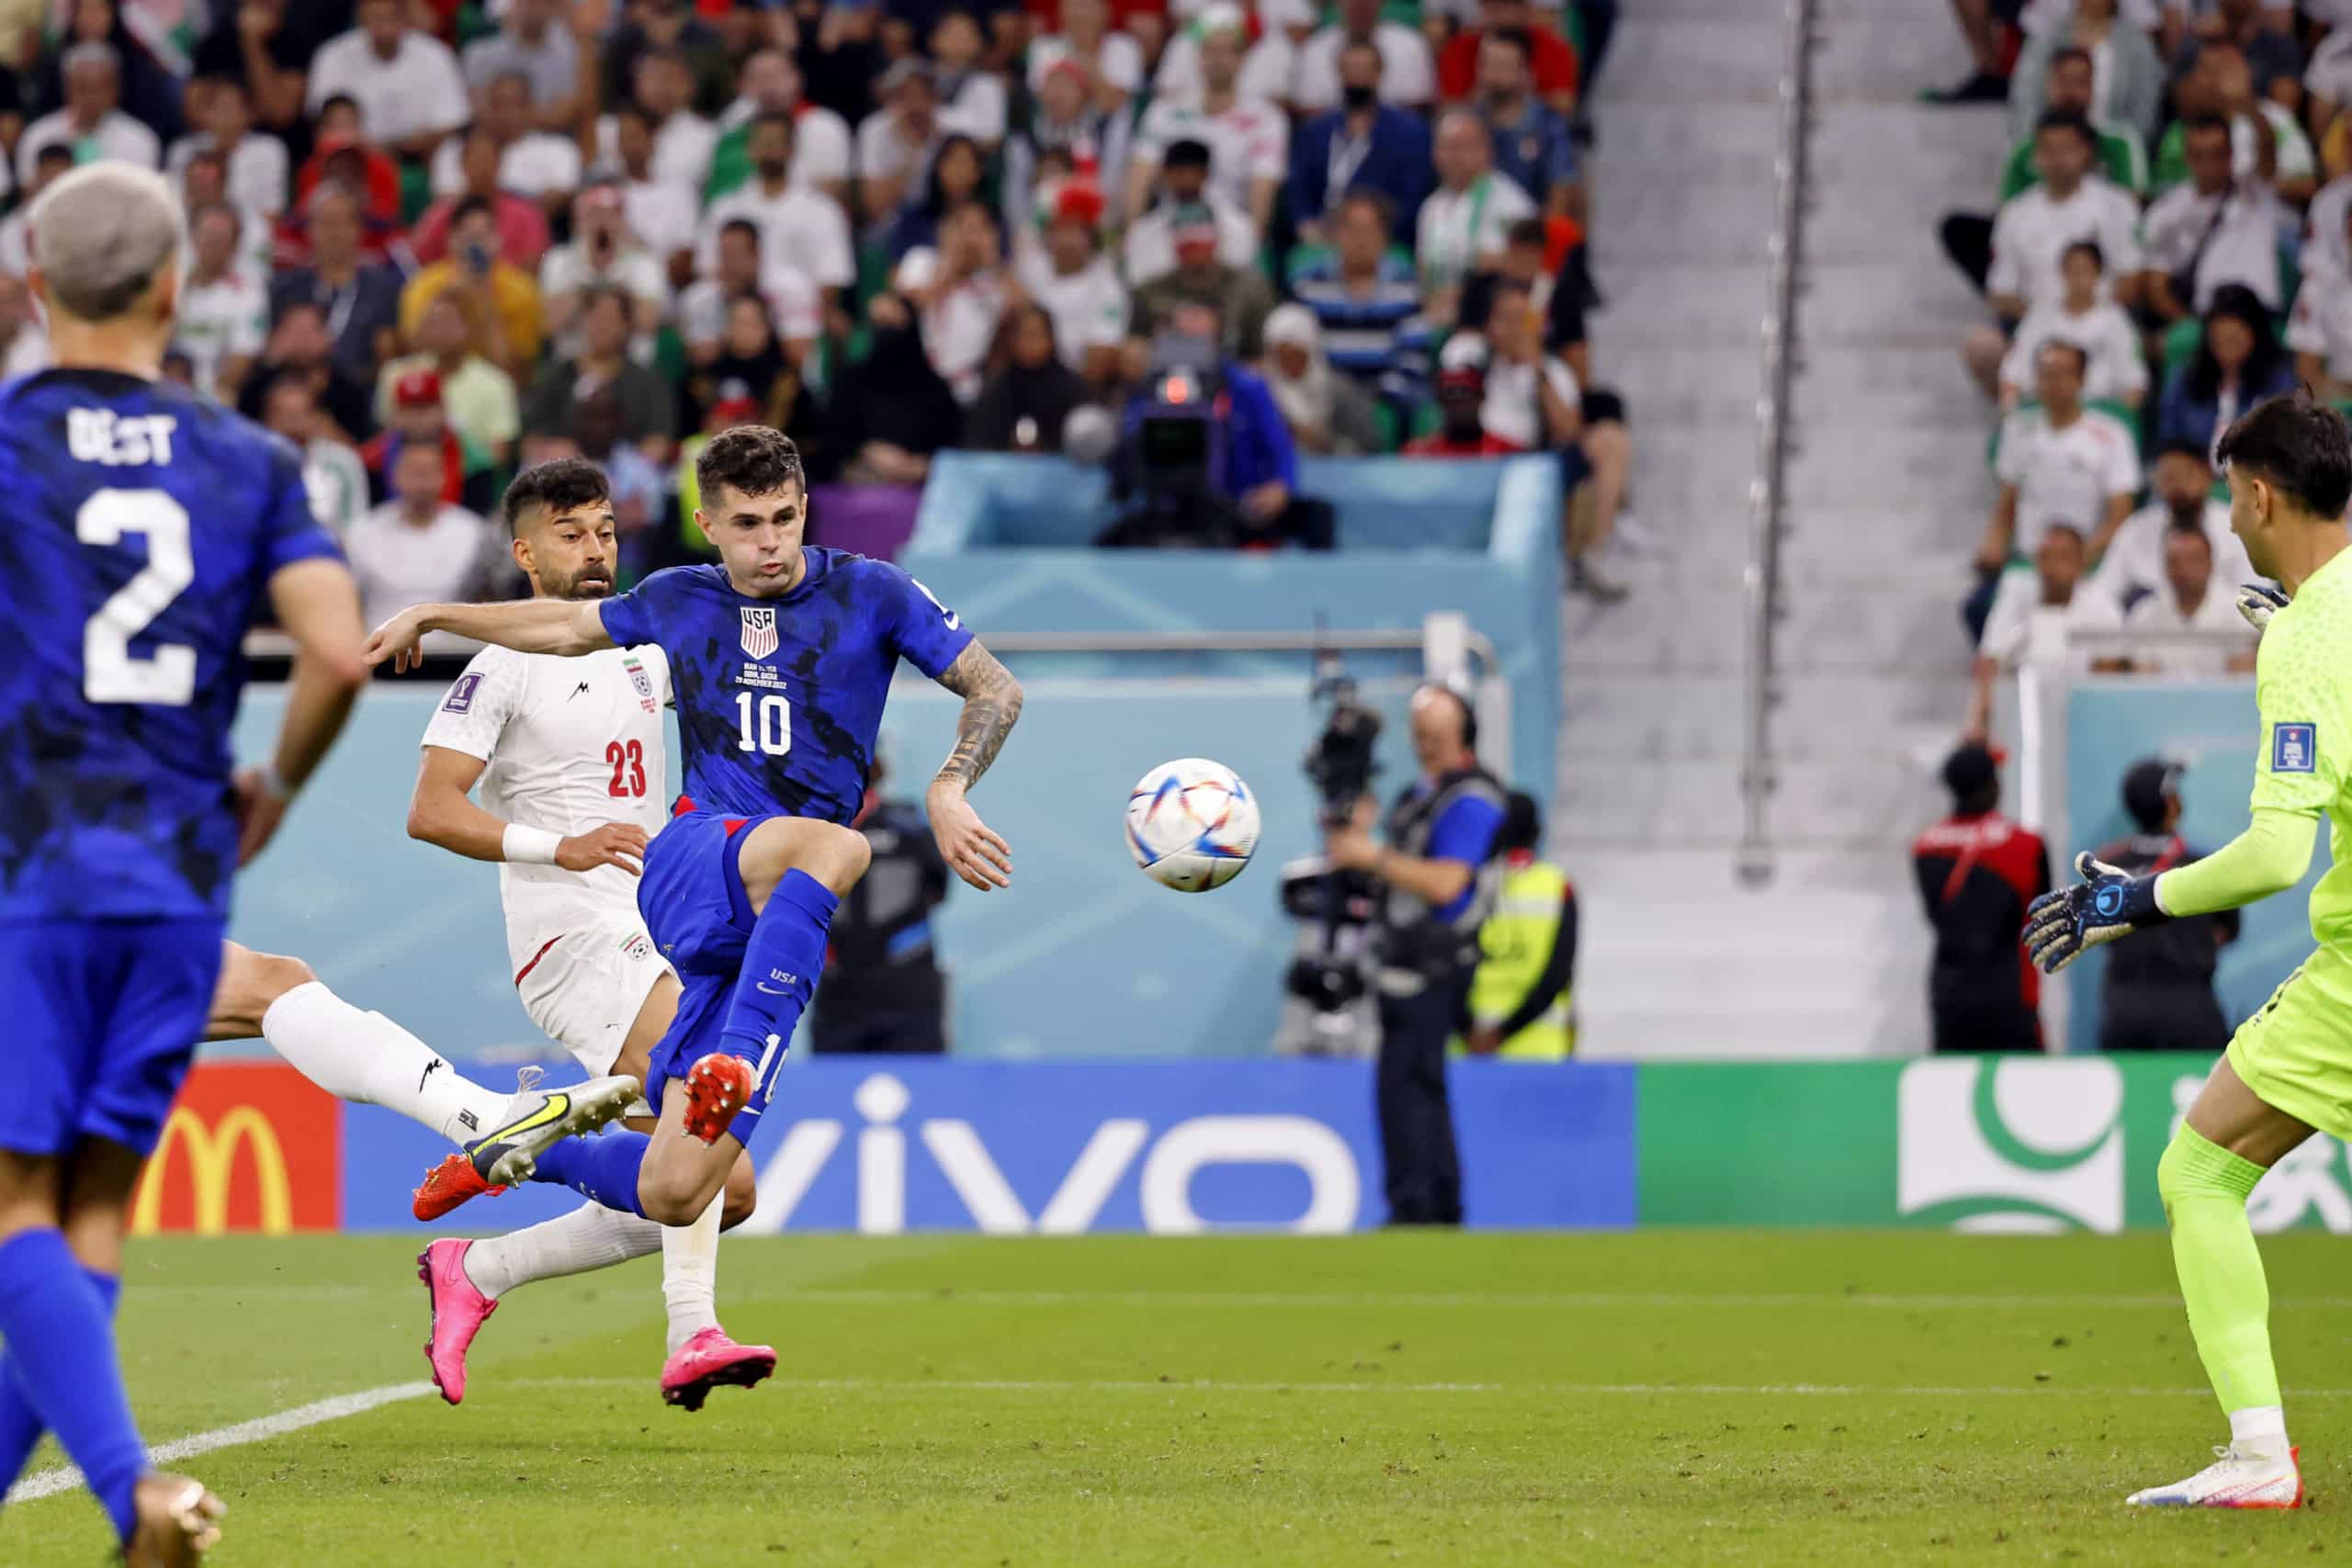 After 3 lackluster matches, knockout play begins for U.S. World Cup team